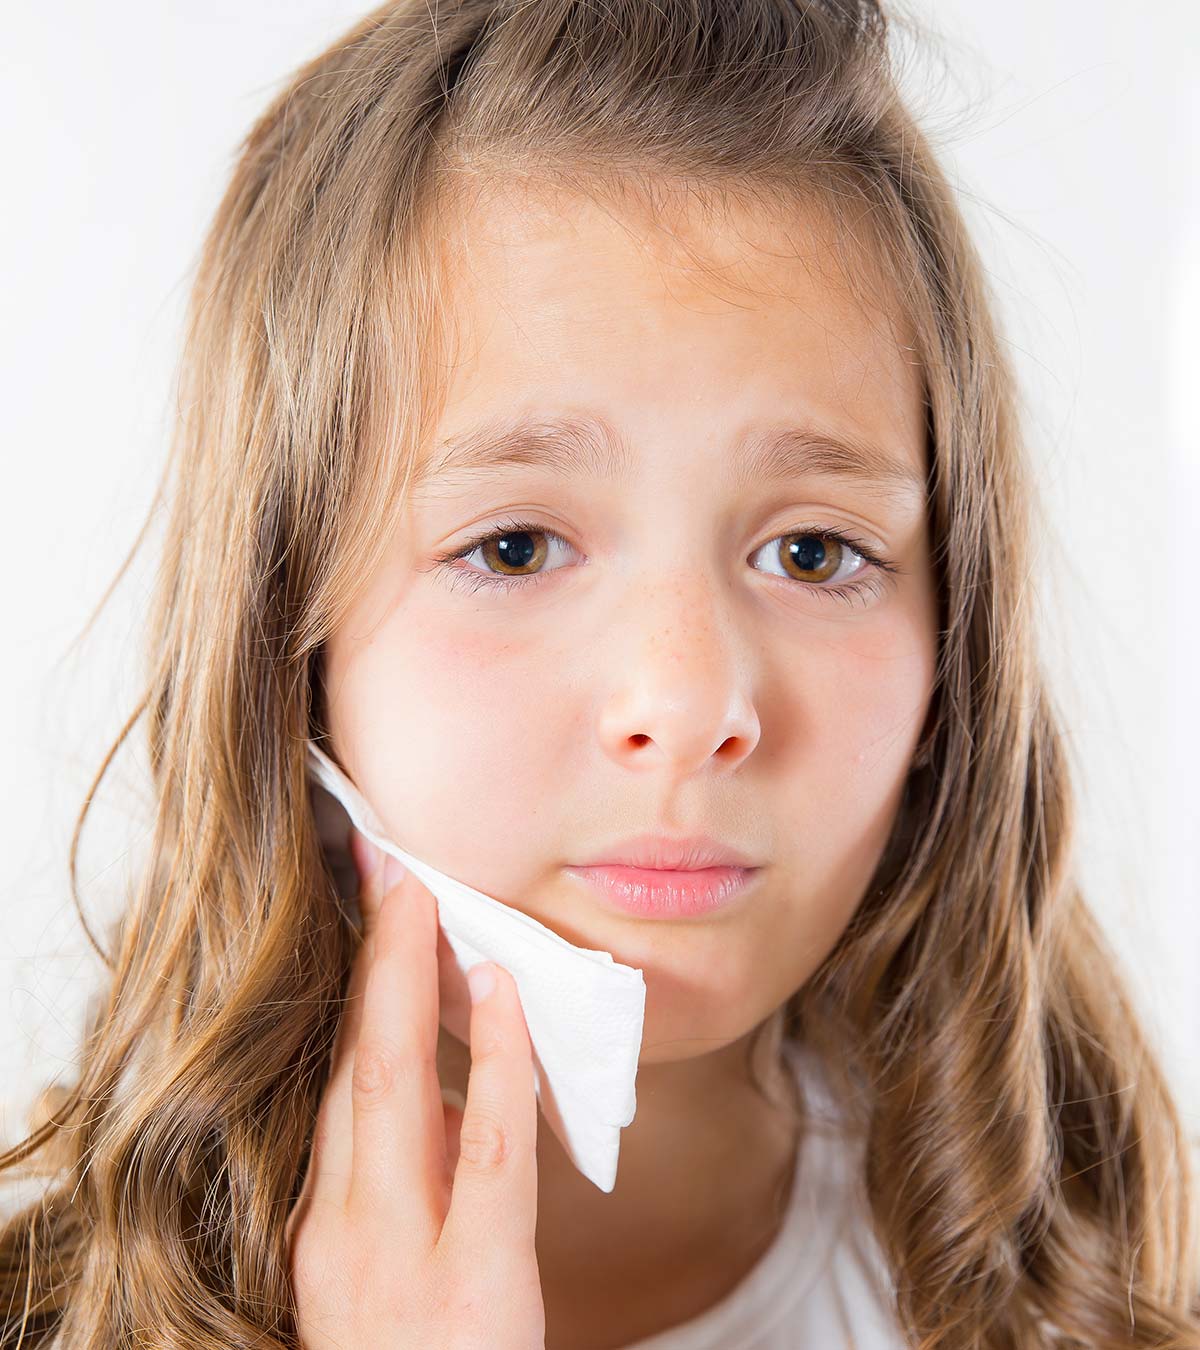 Jaw Pain In Children: Causes, Symptoms And Treatment